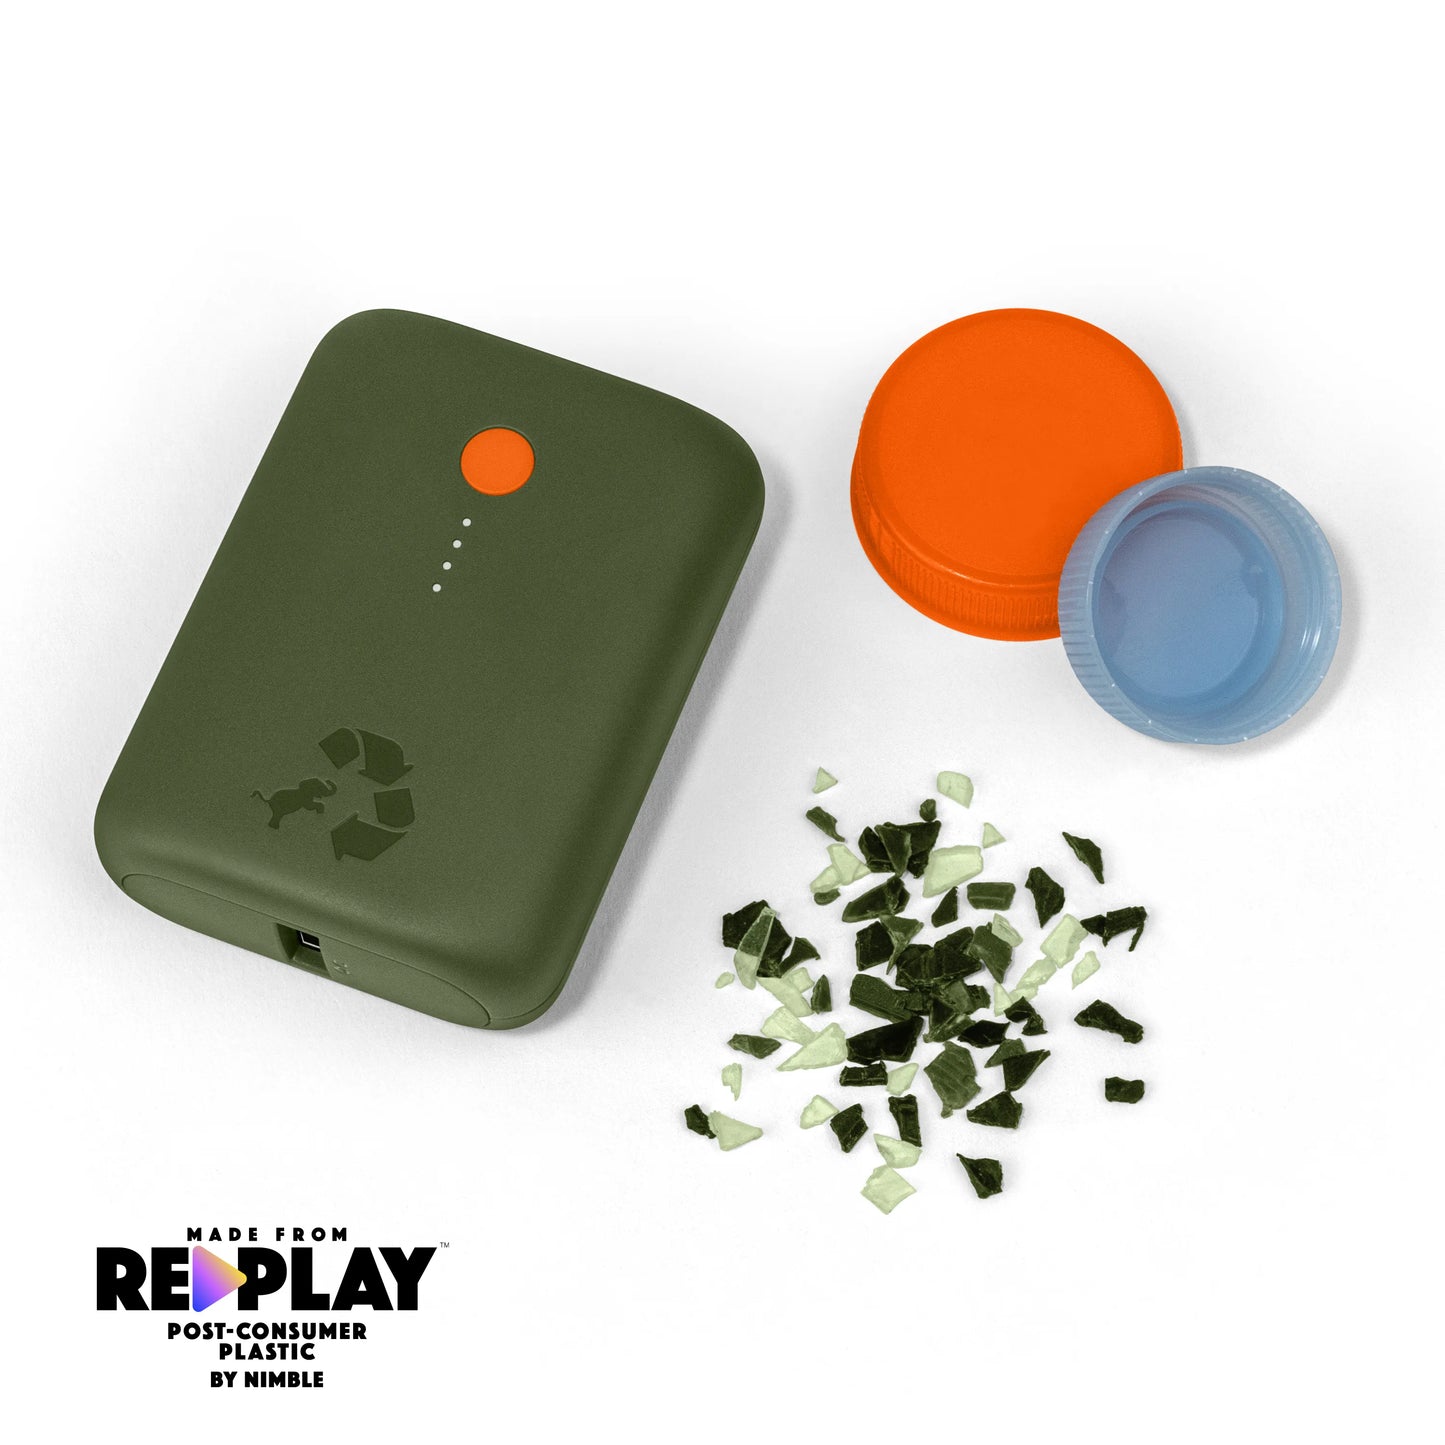 Green portable charger with orange button next to bottle caps and shredded plastic.